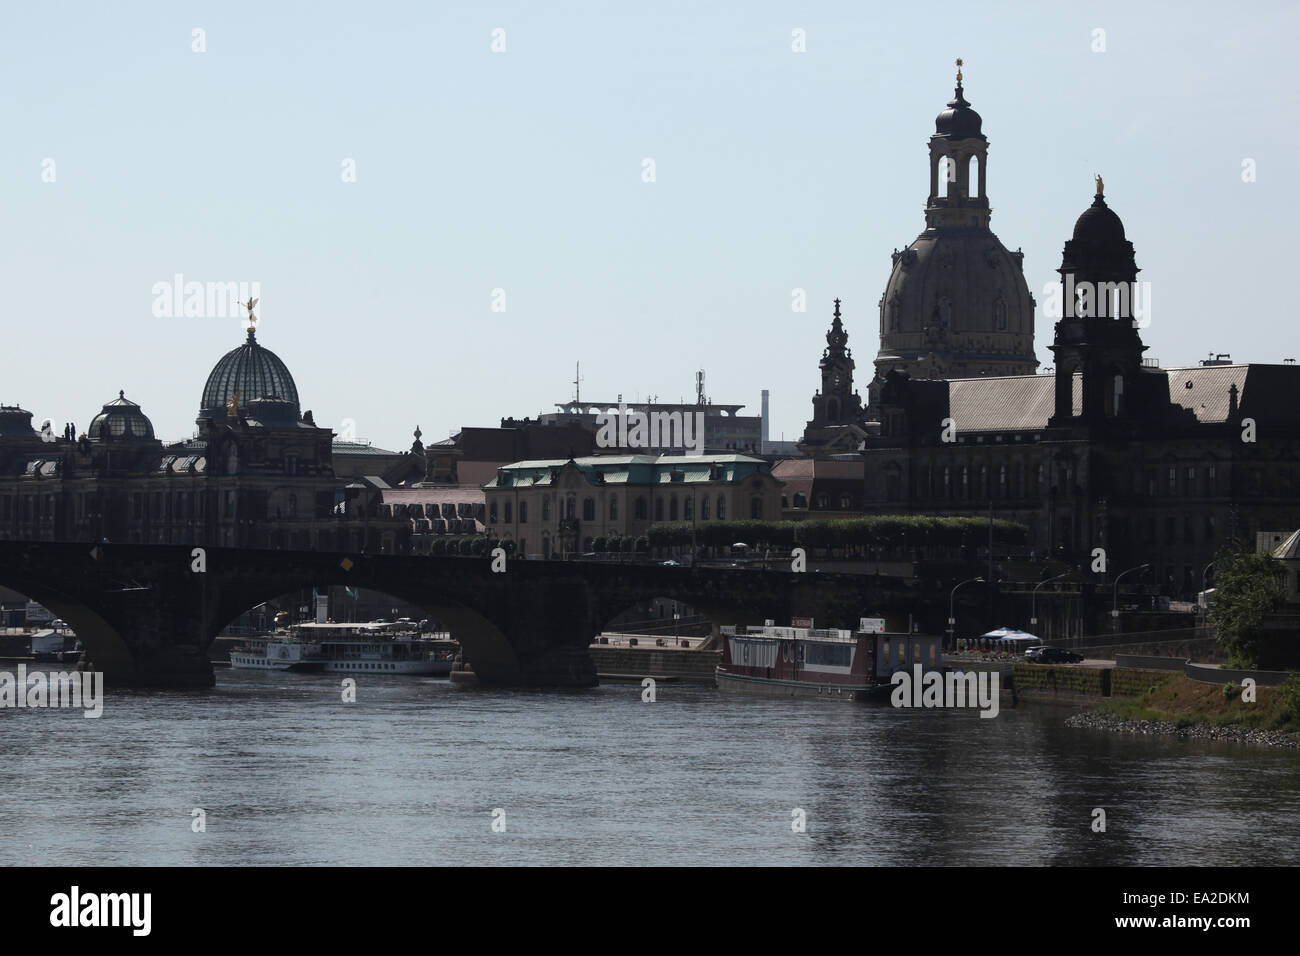 Domes of the Academy of Fine Arts (L) and the Frauenkirche (R) and the Elbe River in Dresden, Saxony, Germany. Stock Photo